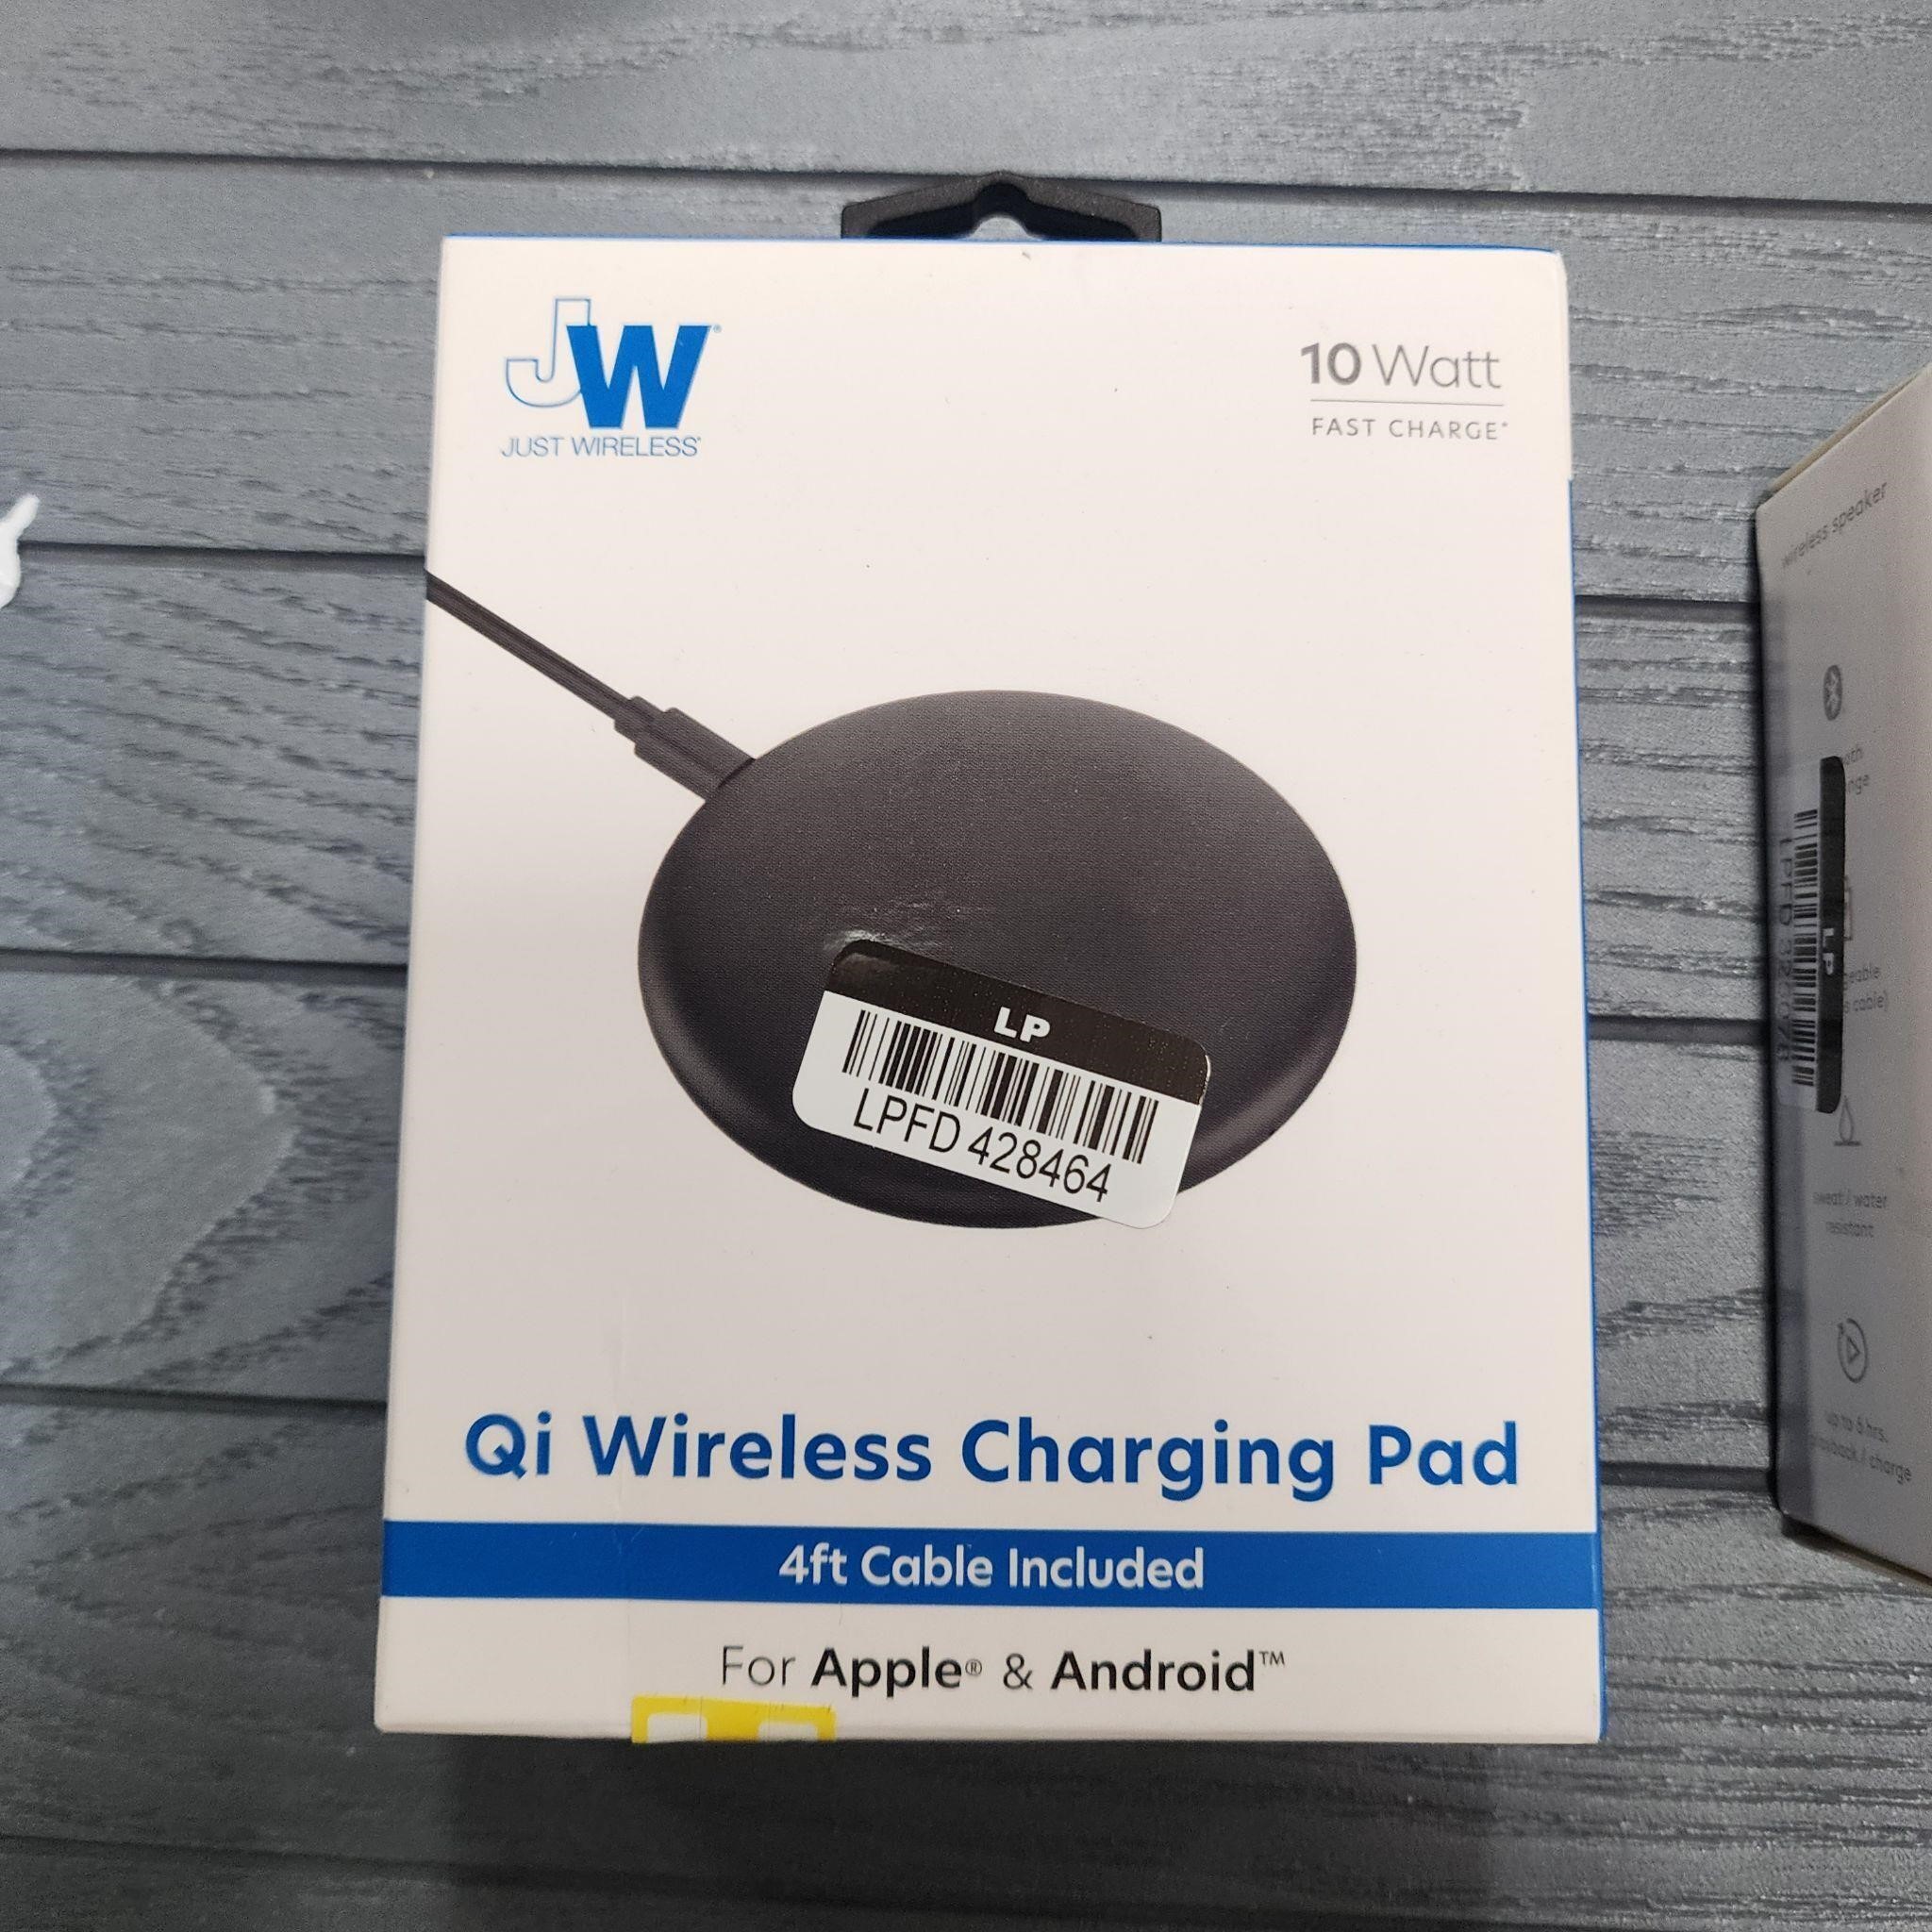 Just Wireless 10W Qi Wireless Charging Pad with 4'